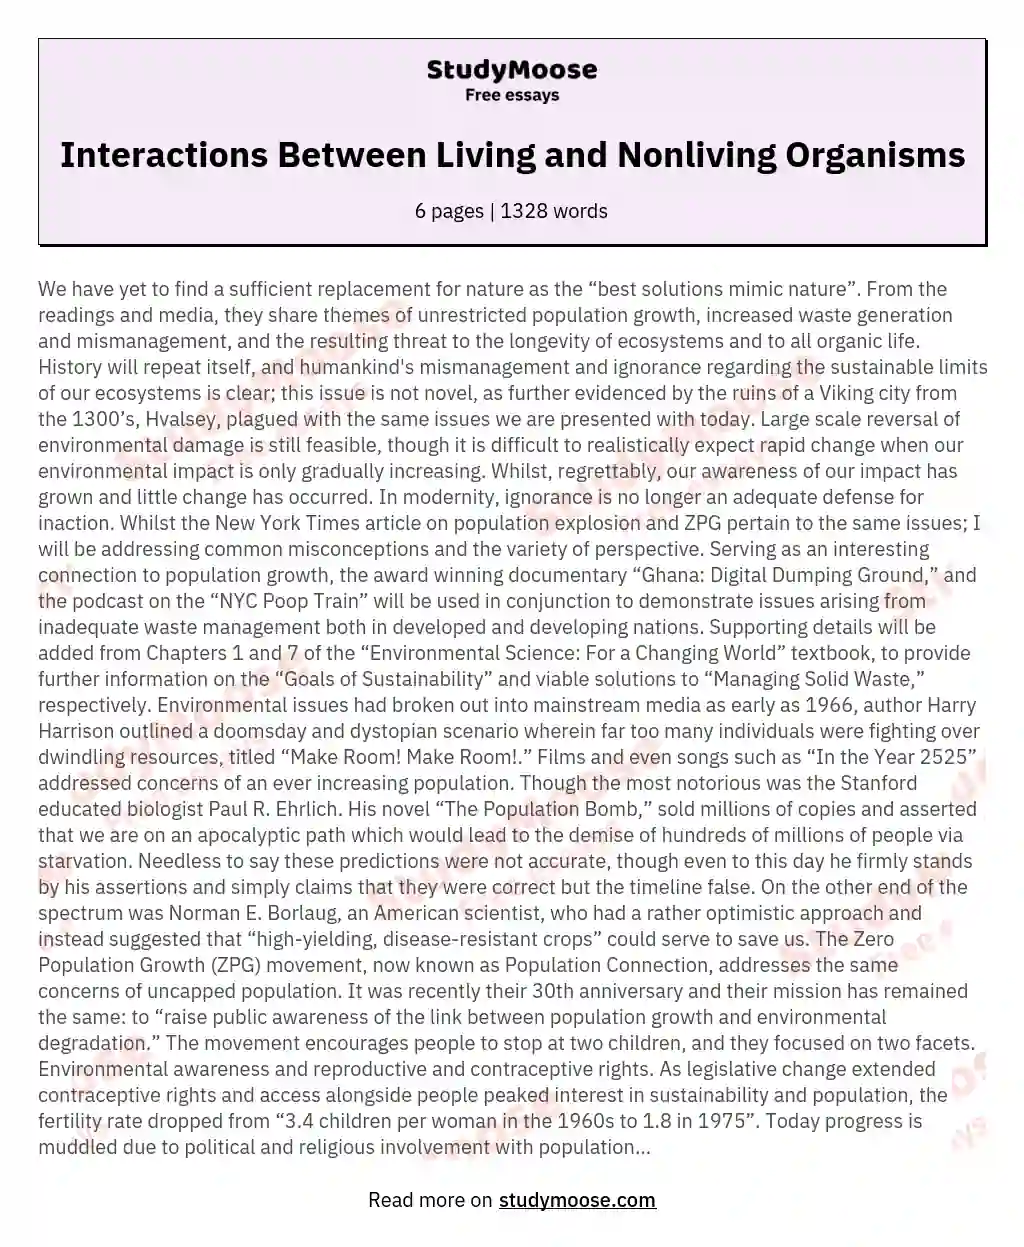 Interactions Between Living and Nonliving Organisms essay